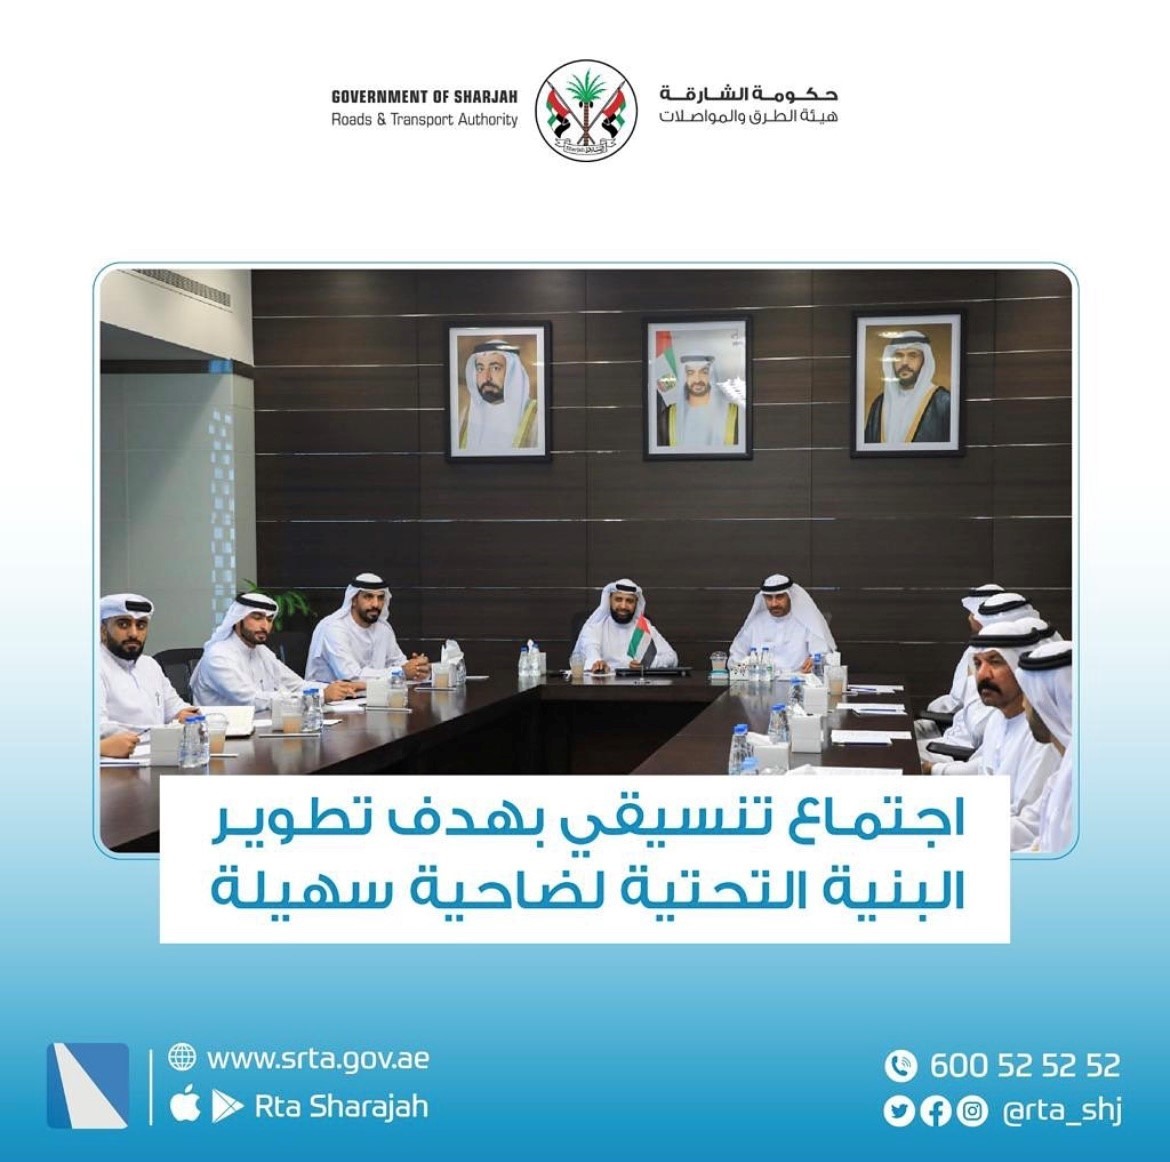 A coordination meeting aimed at developing the infrastructure of the Suhaila suburb